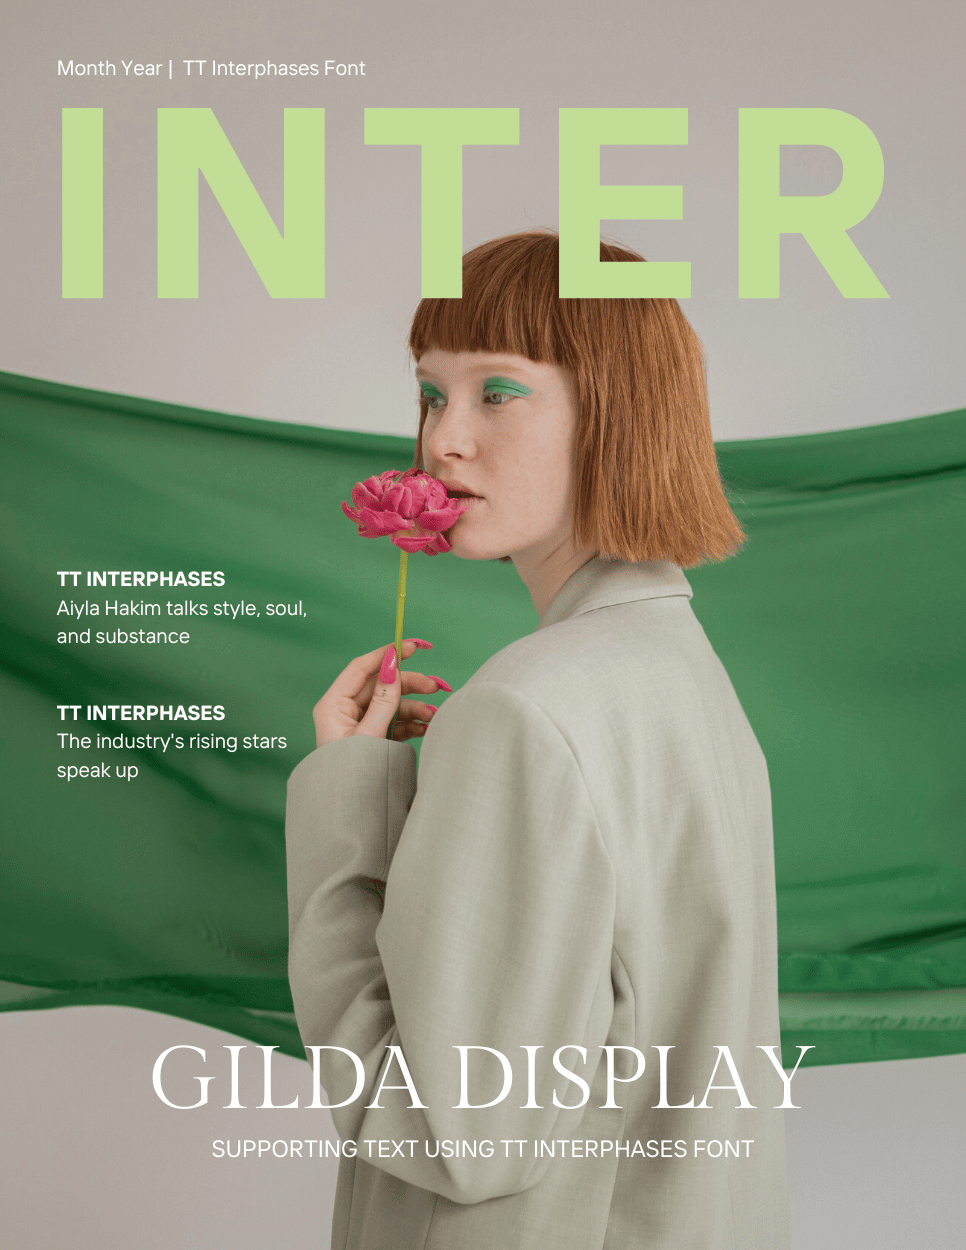 TT Interphases Font Pairing With Gilda Display